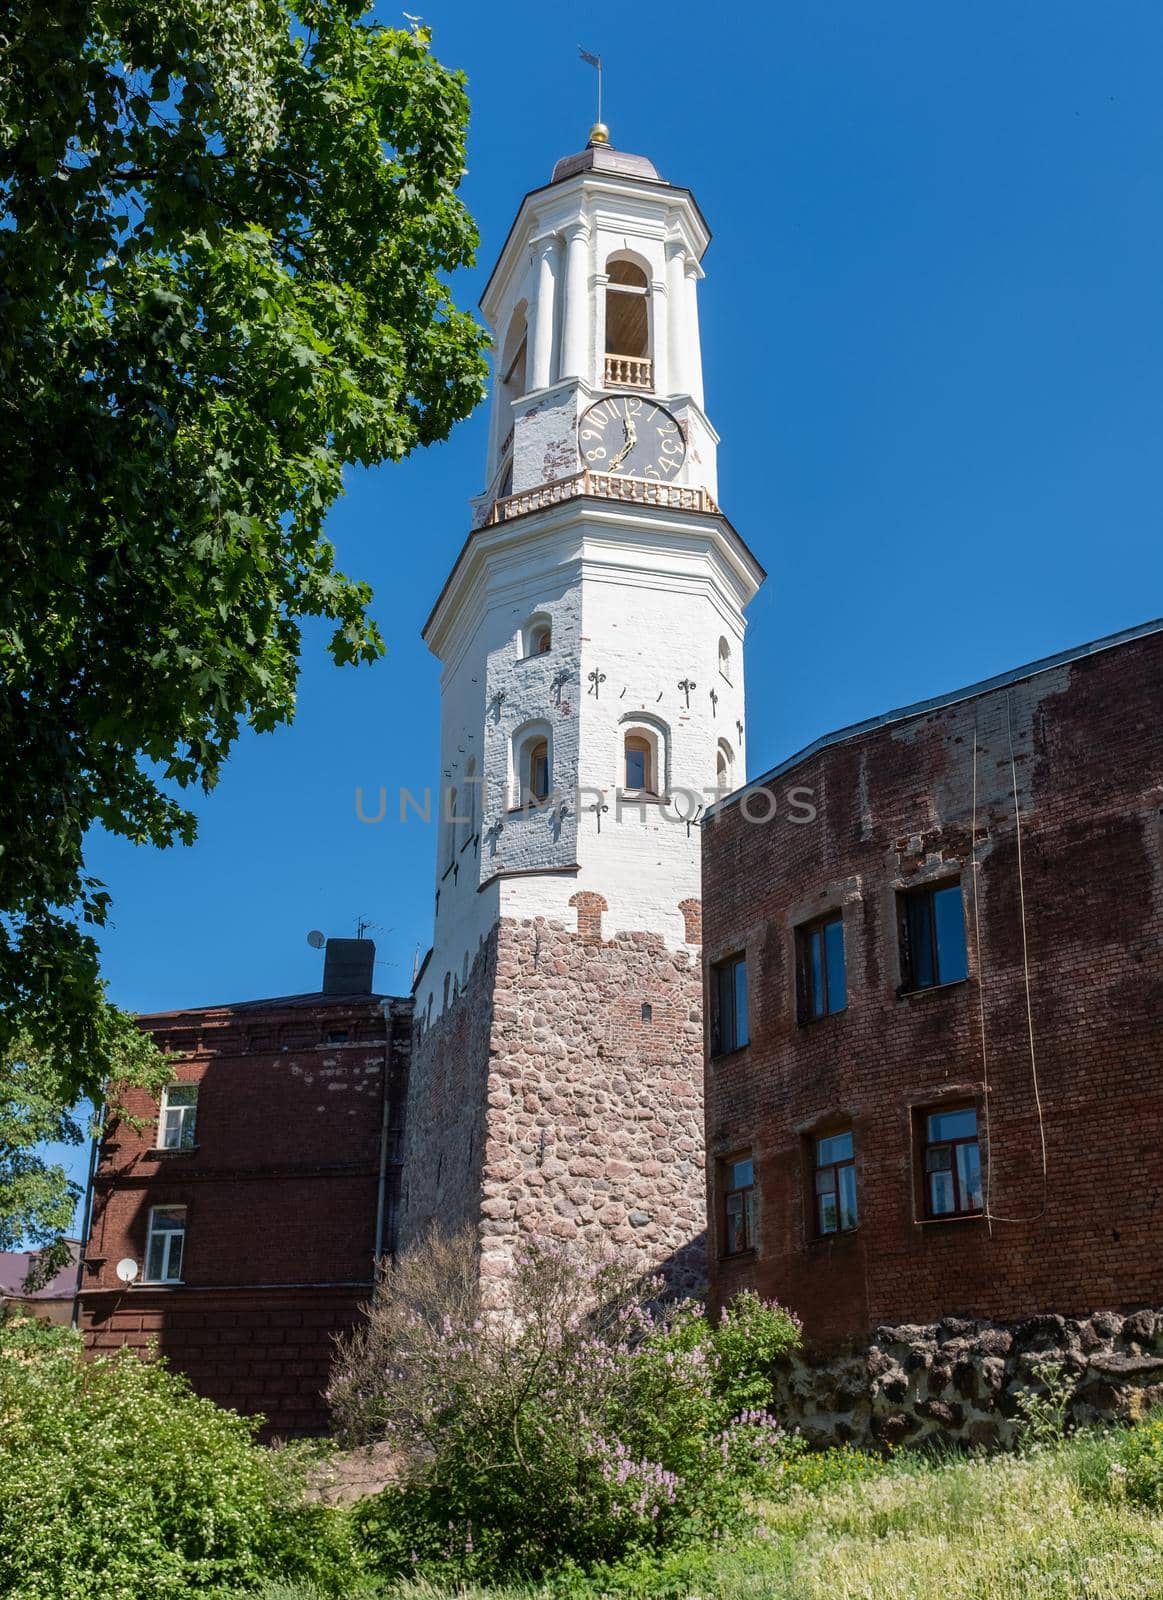 The Clock Tower is the former bell tower of the destroyed Old Cathedral in Vyborg.